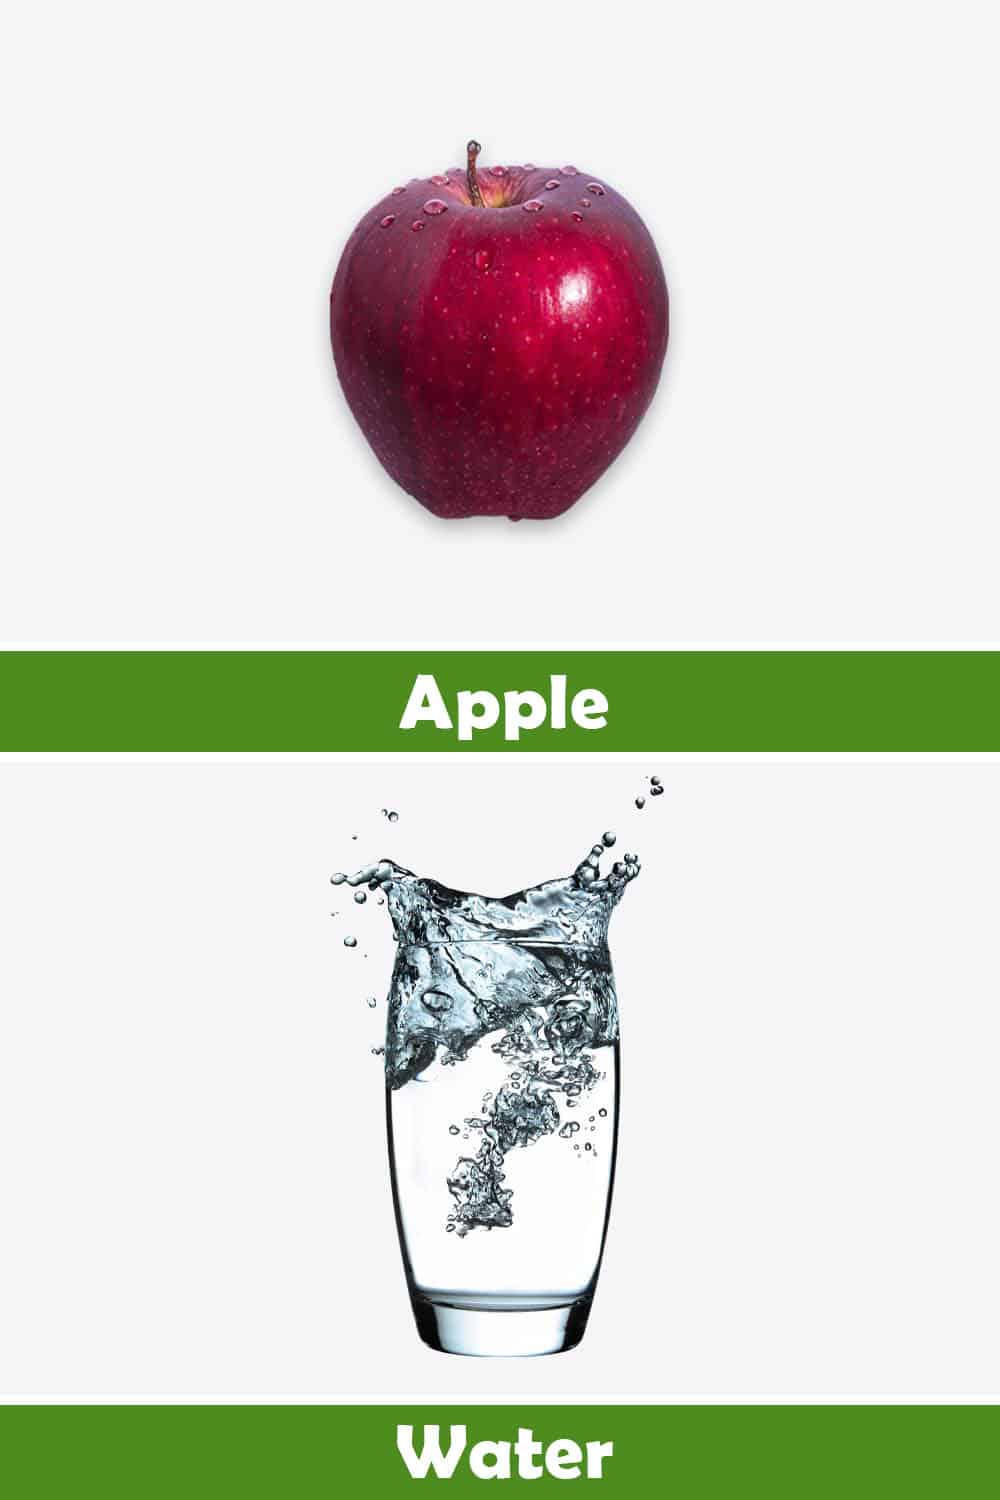 APPLE AND WATER